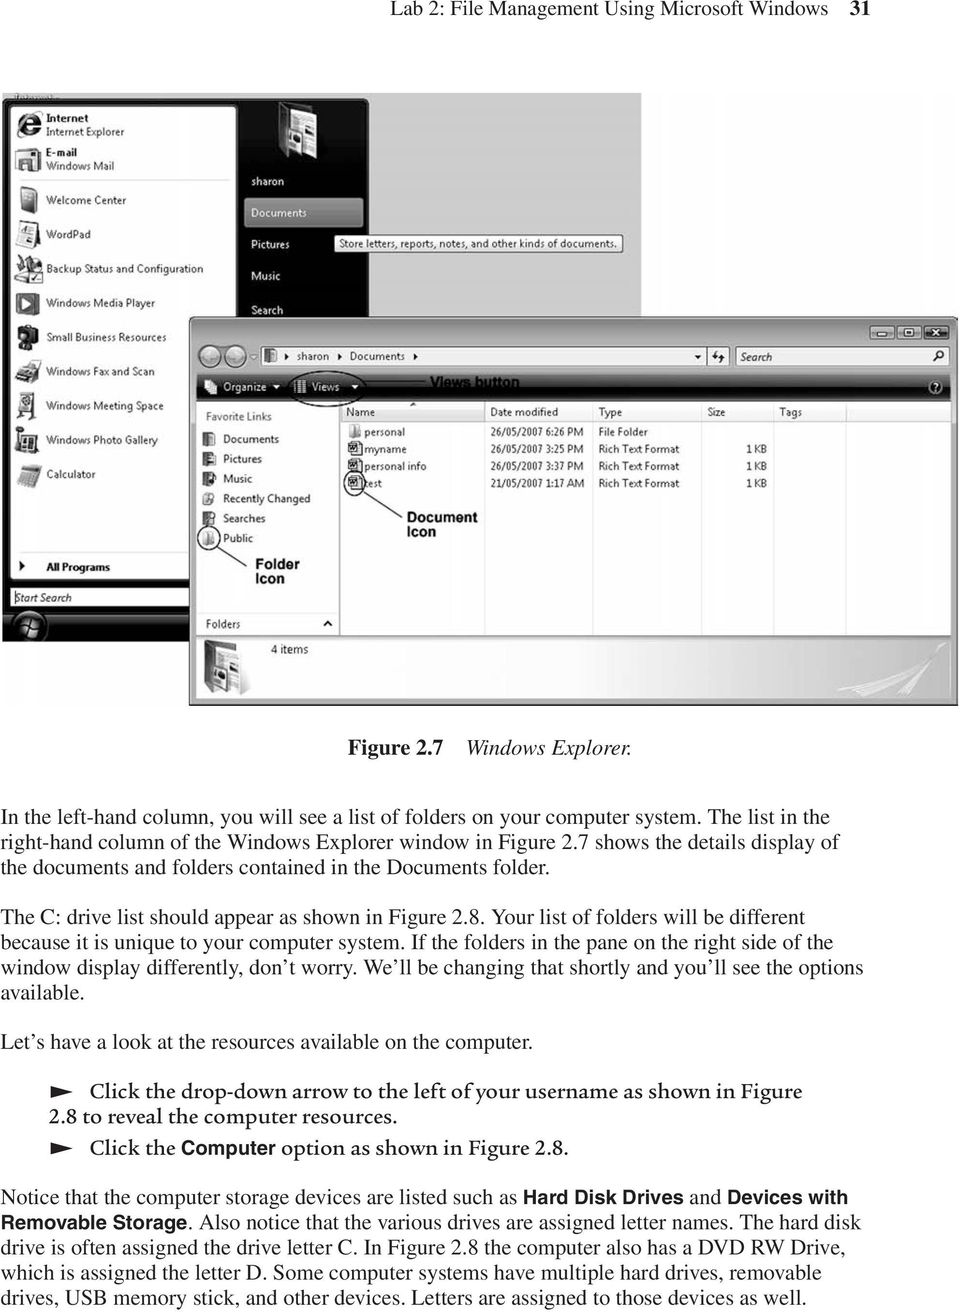 The C: drive list should appear as shown in Figure 2.8. Your list of folders will be different because it is unique to your computer system.